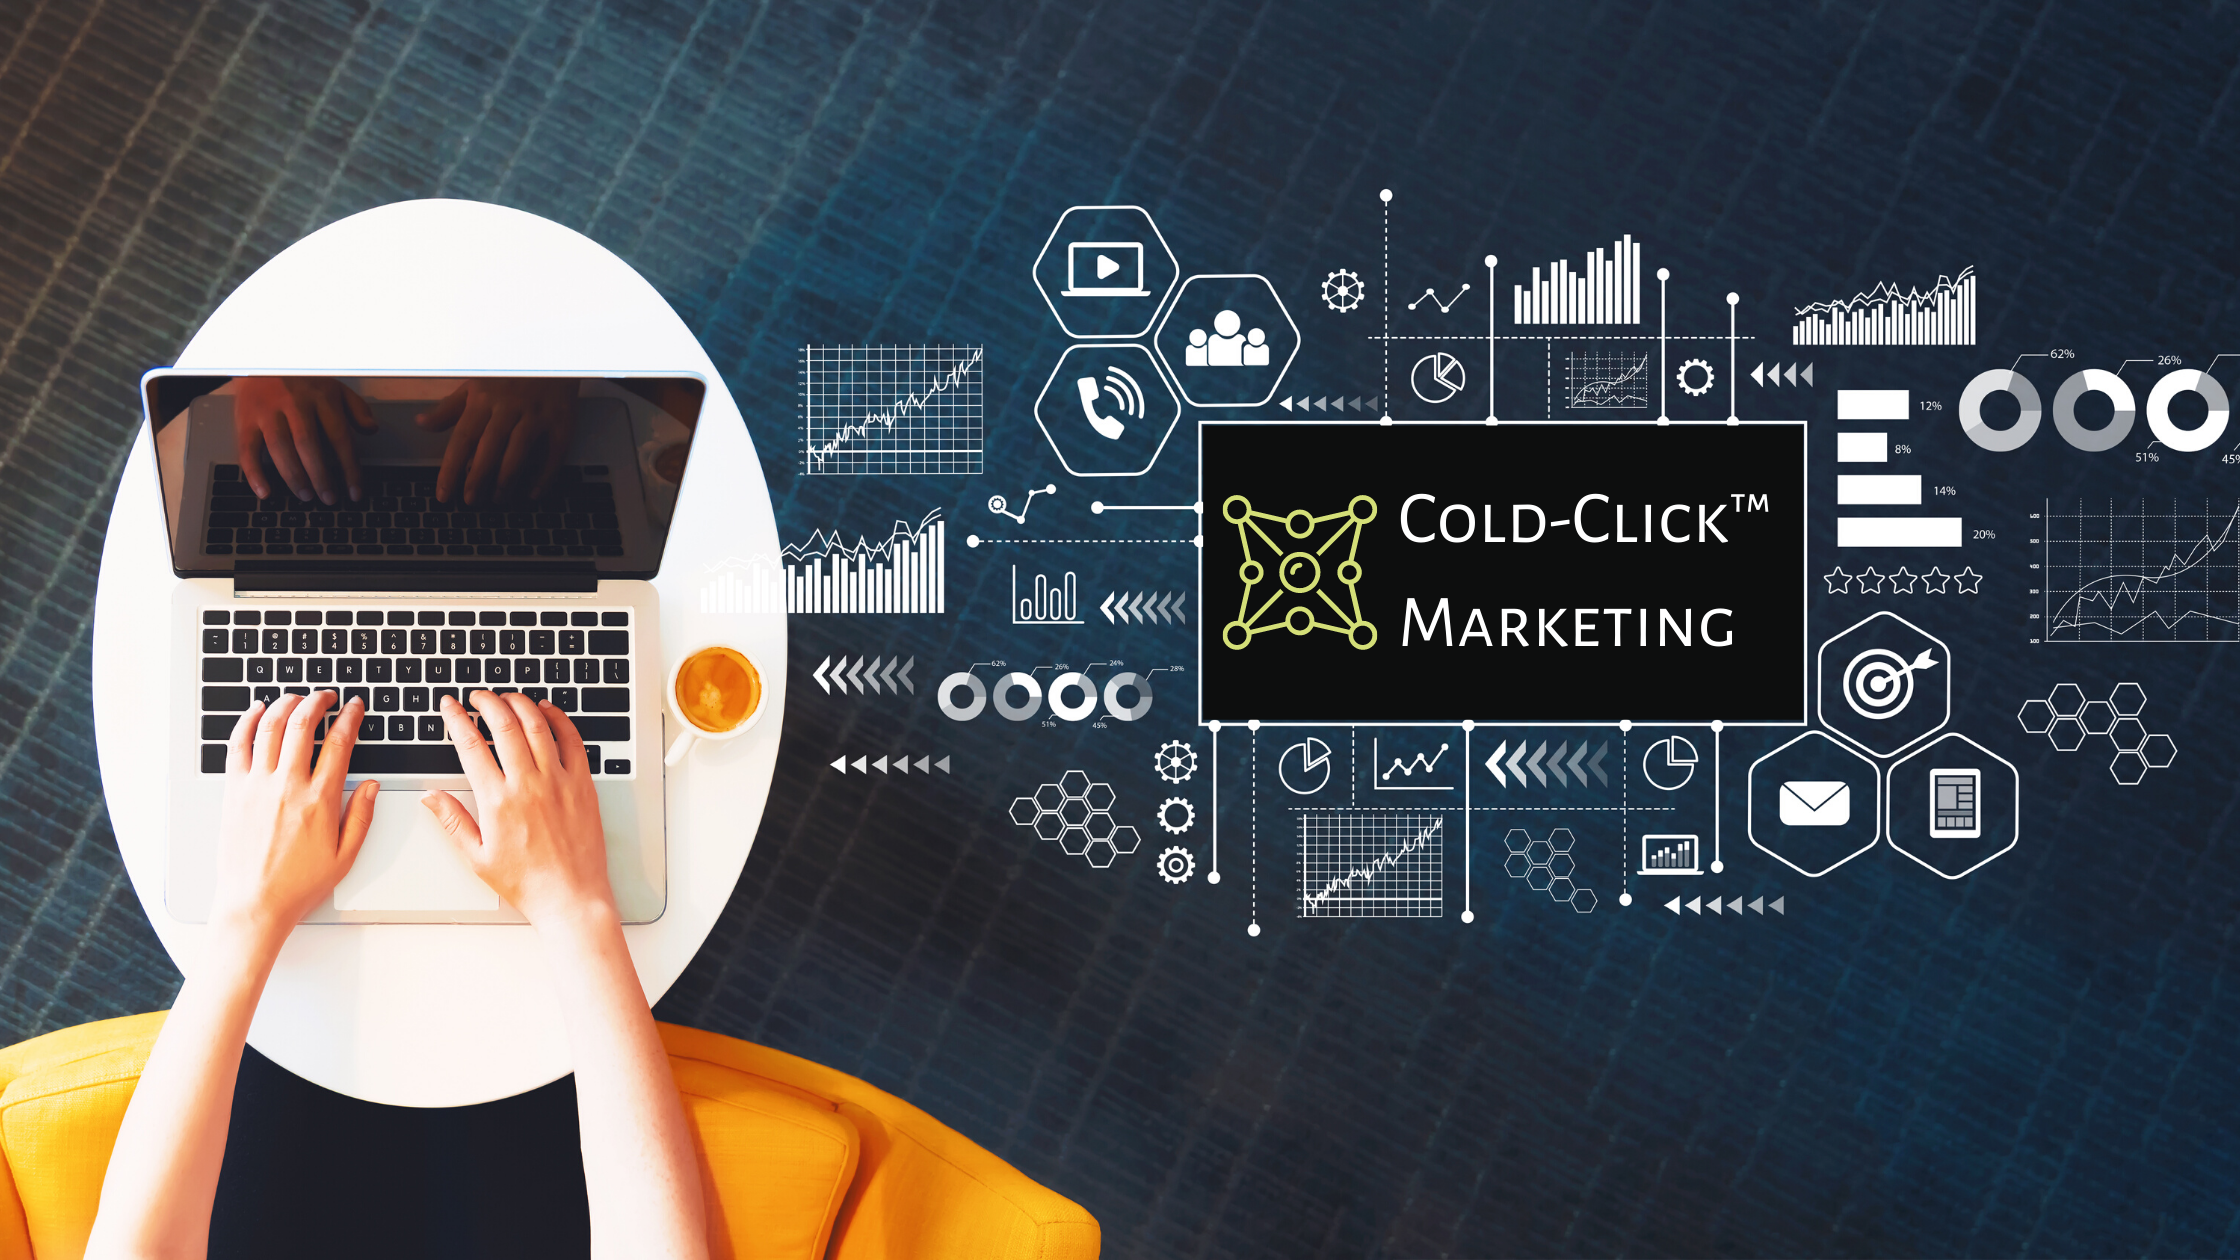 cold-click marketing, digital marketing, col-click, in-link advisors, how to get new clients, what is cold-click marketing, social media marketing, marketing on linkedin